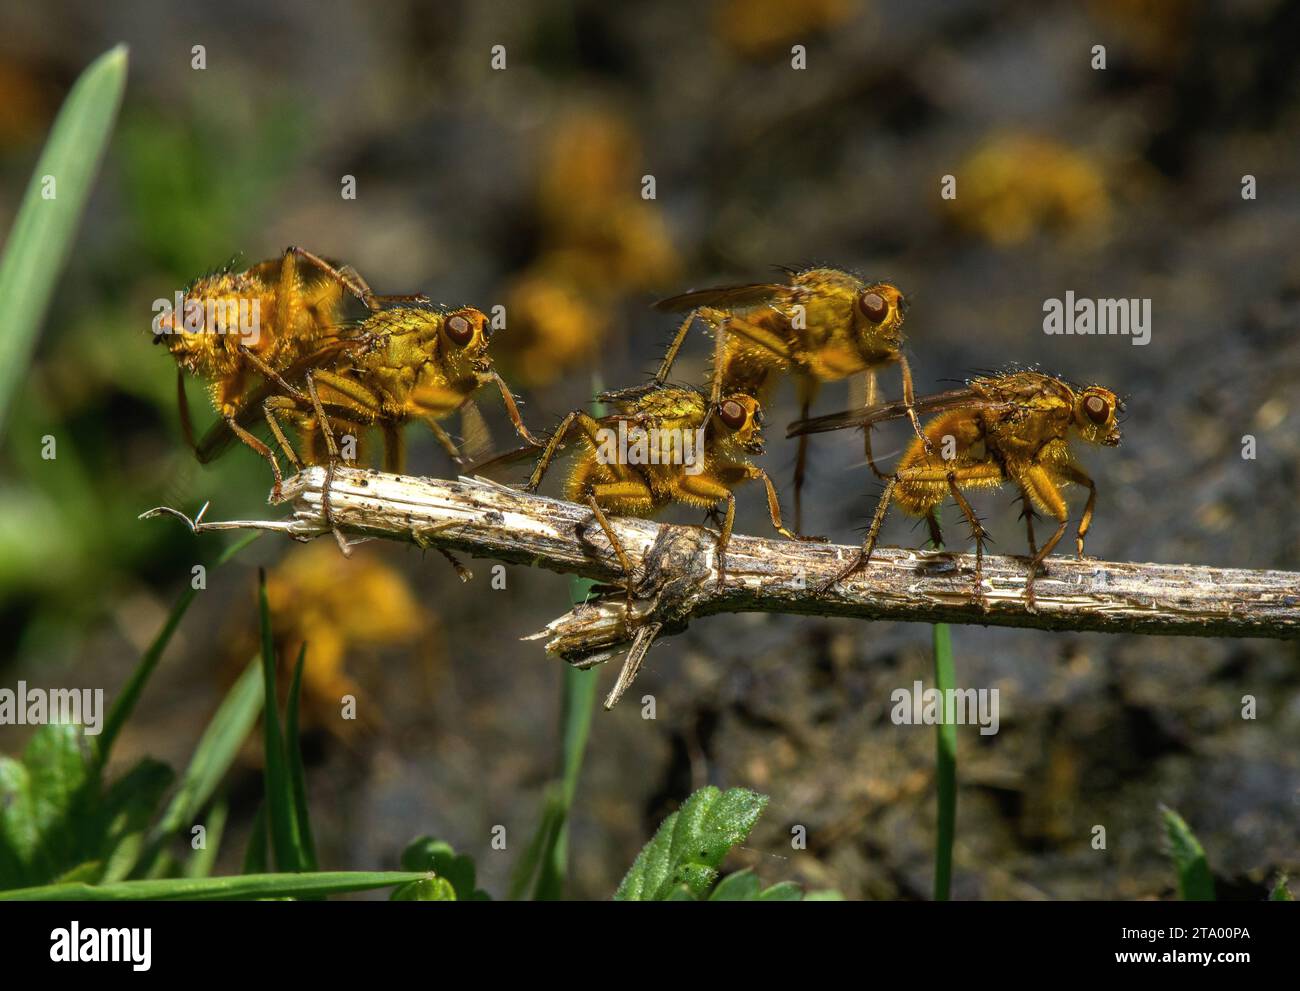 Yellow dung flies, Scathophaga stercoraria, in large numbers on organically-farmed cattle dung. Stock Photo